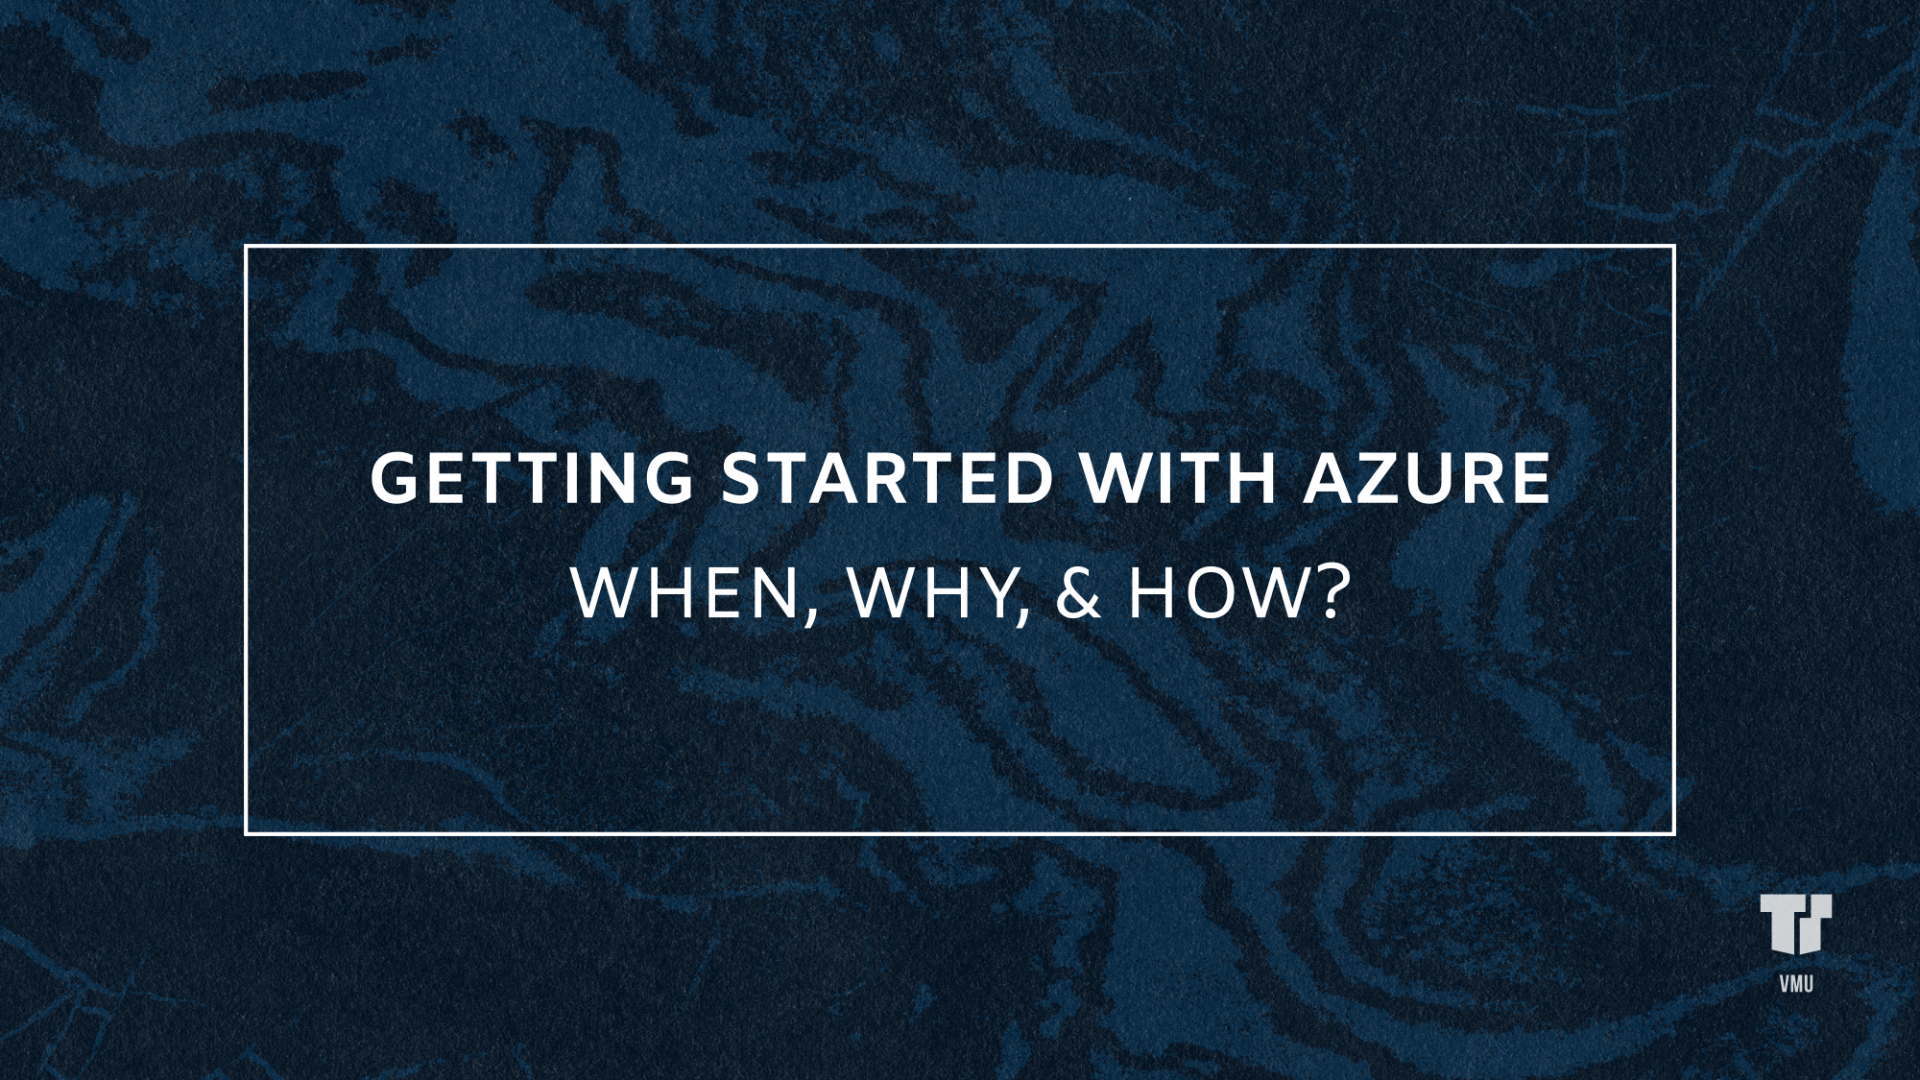 Getting Started with Azure: When, Why, & How? cover image